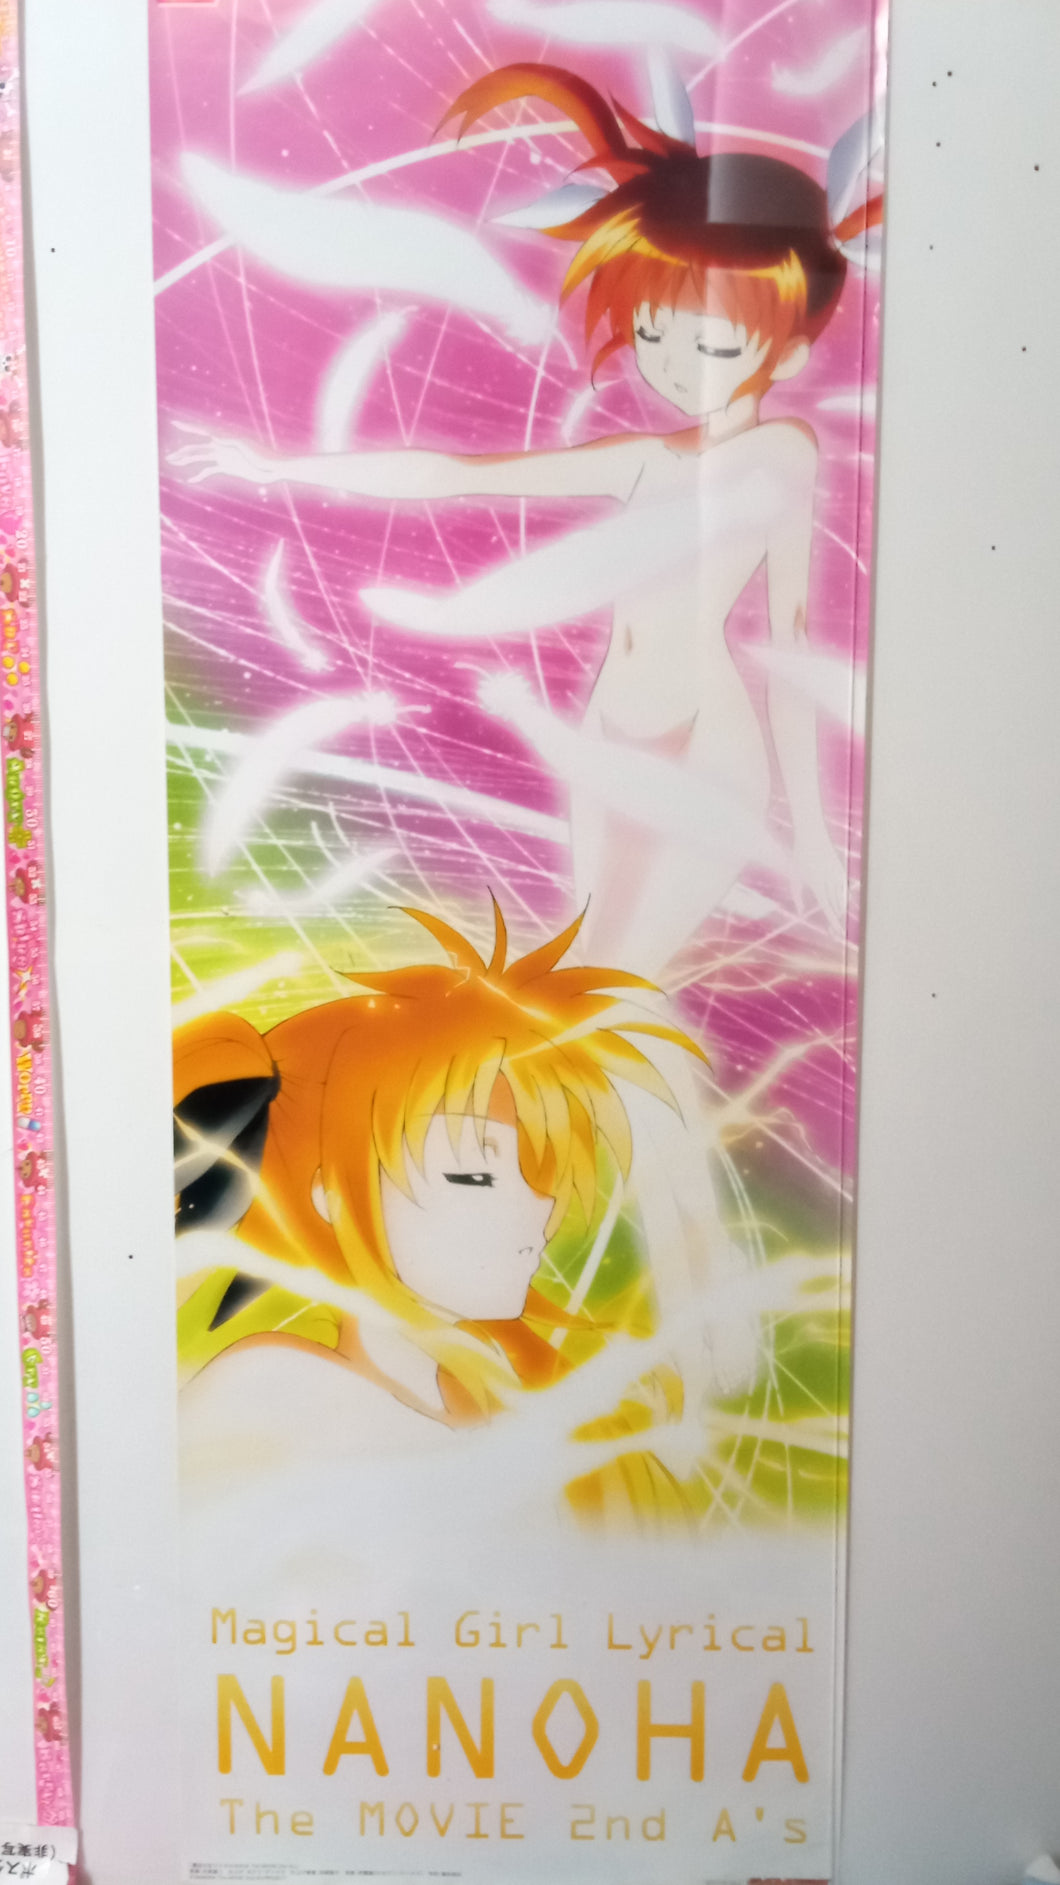 Magical Girl Lyrical Nanoha The MOVIE 2nd A's Stick Poster